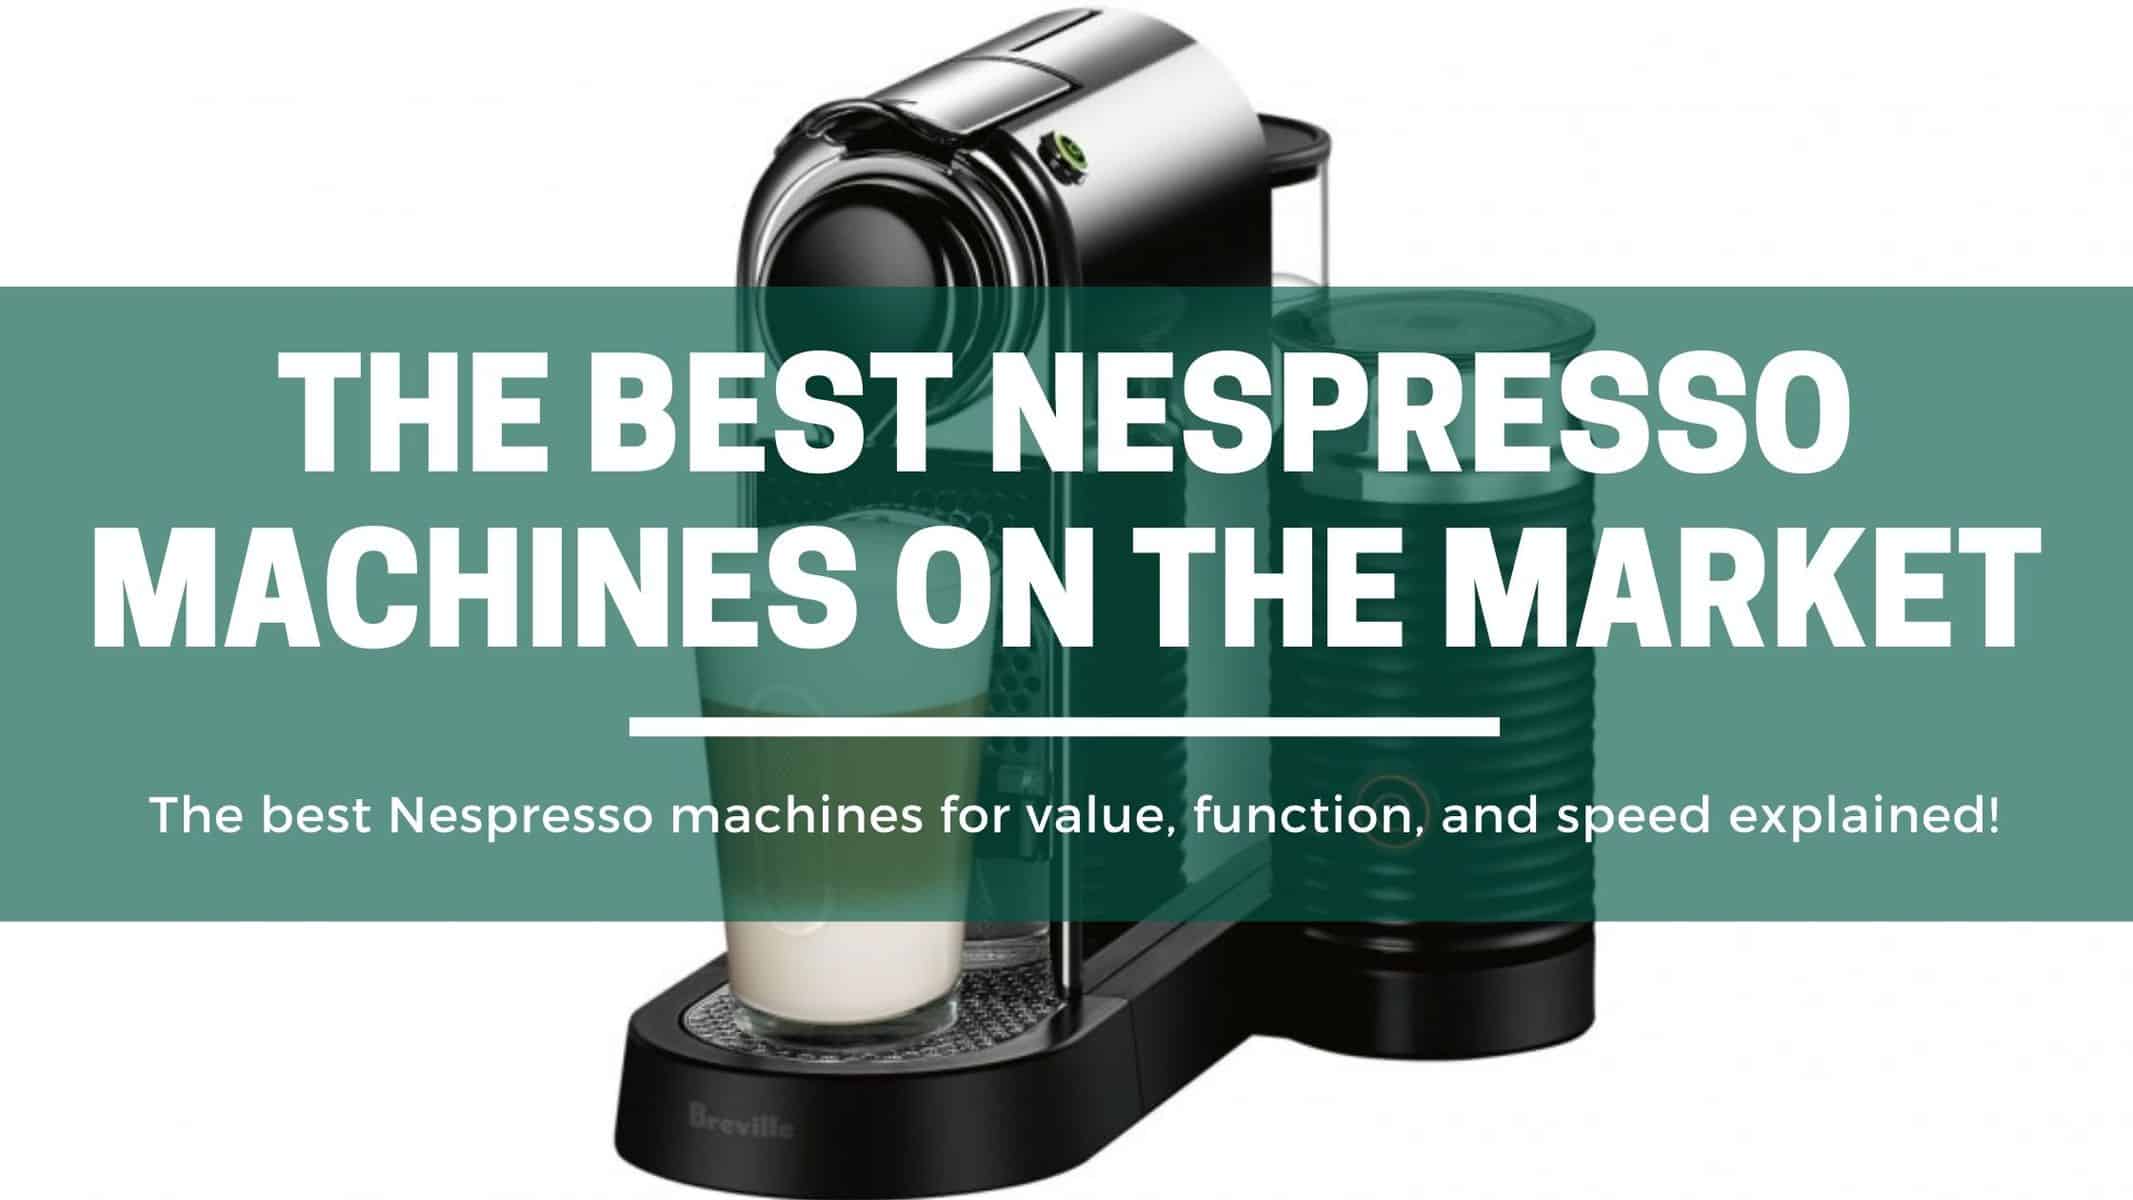 The Green Pods The Best Nespresso Machine to buy reviewed